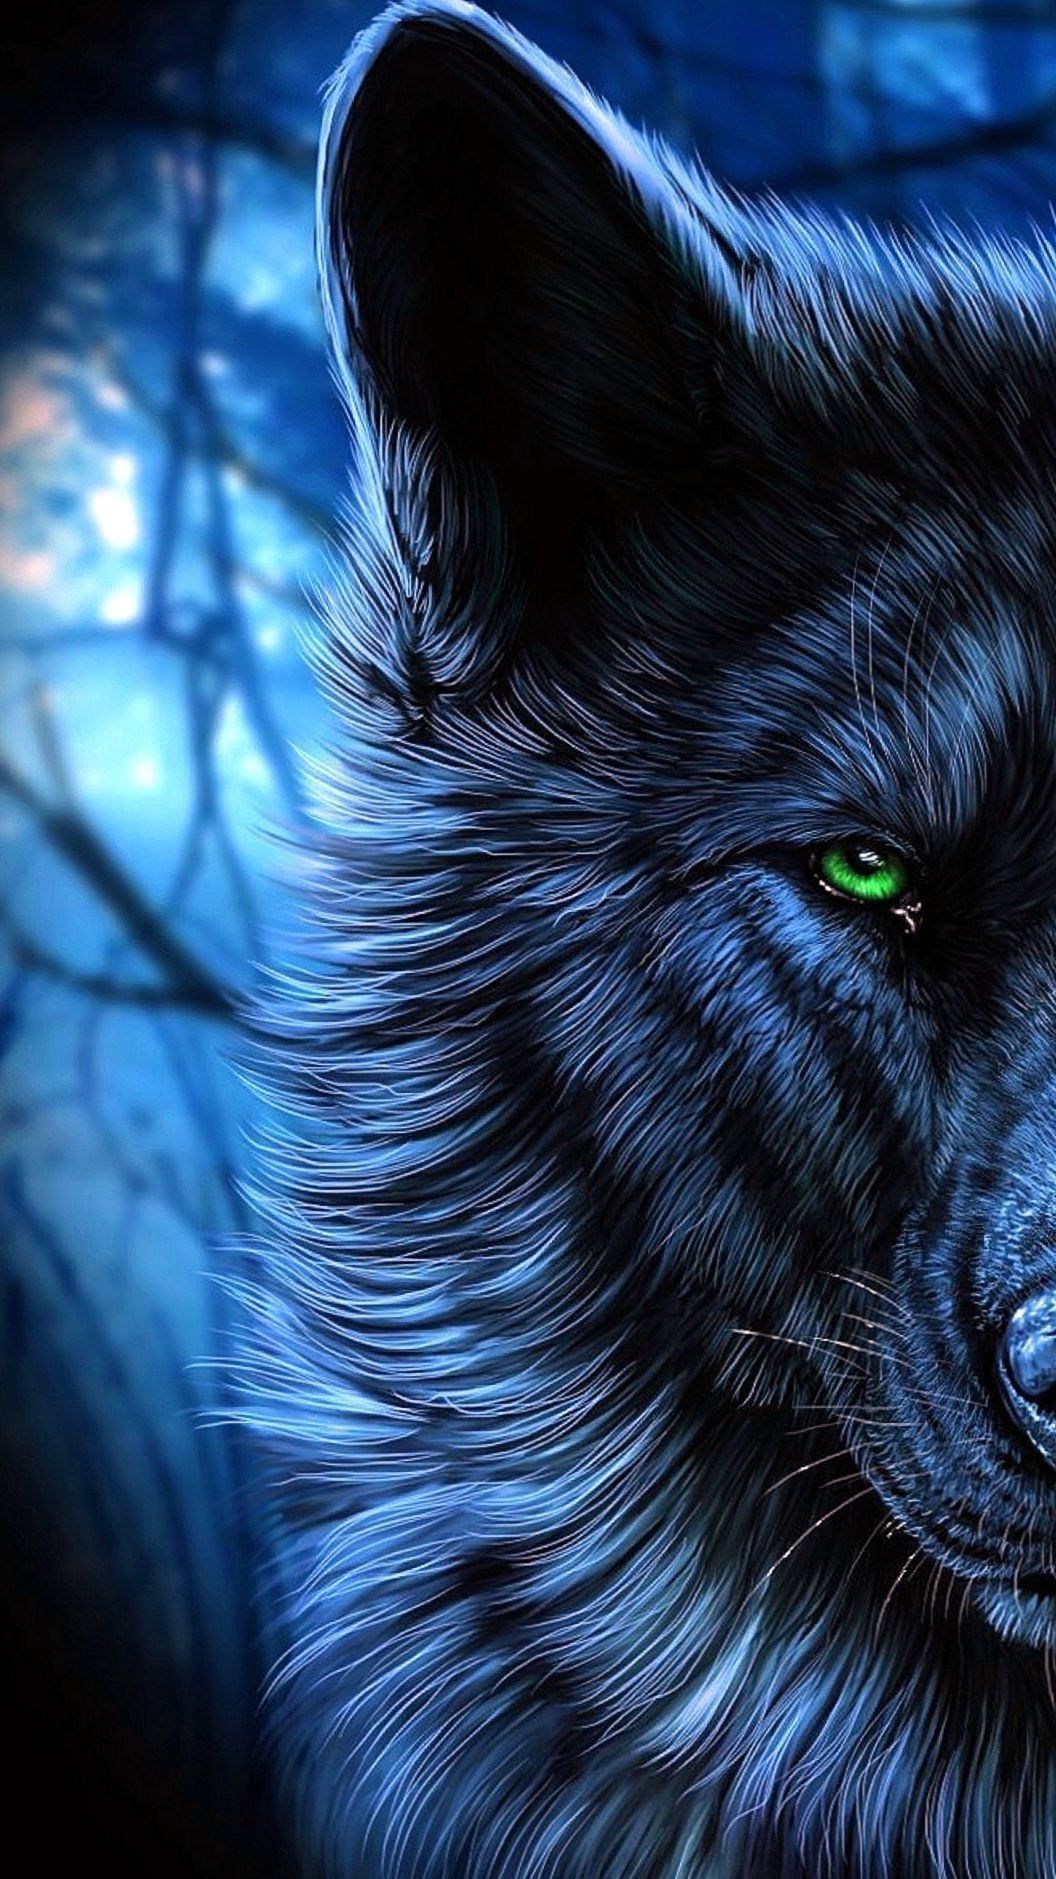 Black Wolves With Blue Eyes Wallpaper. Eyes wallpaper, Wolf